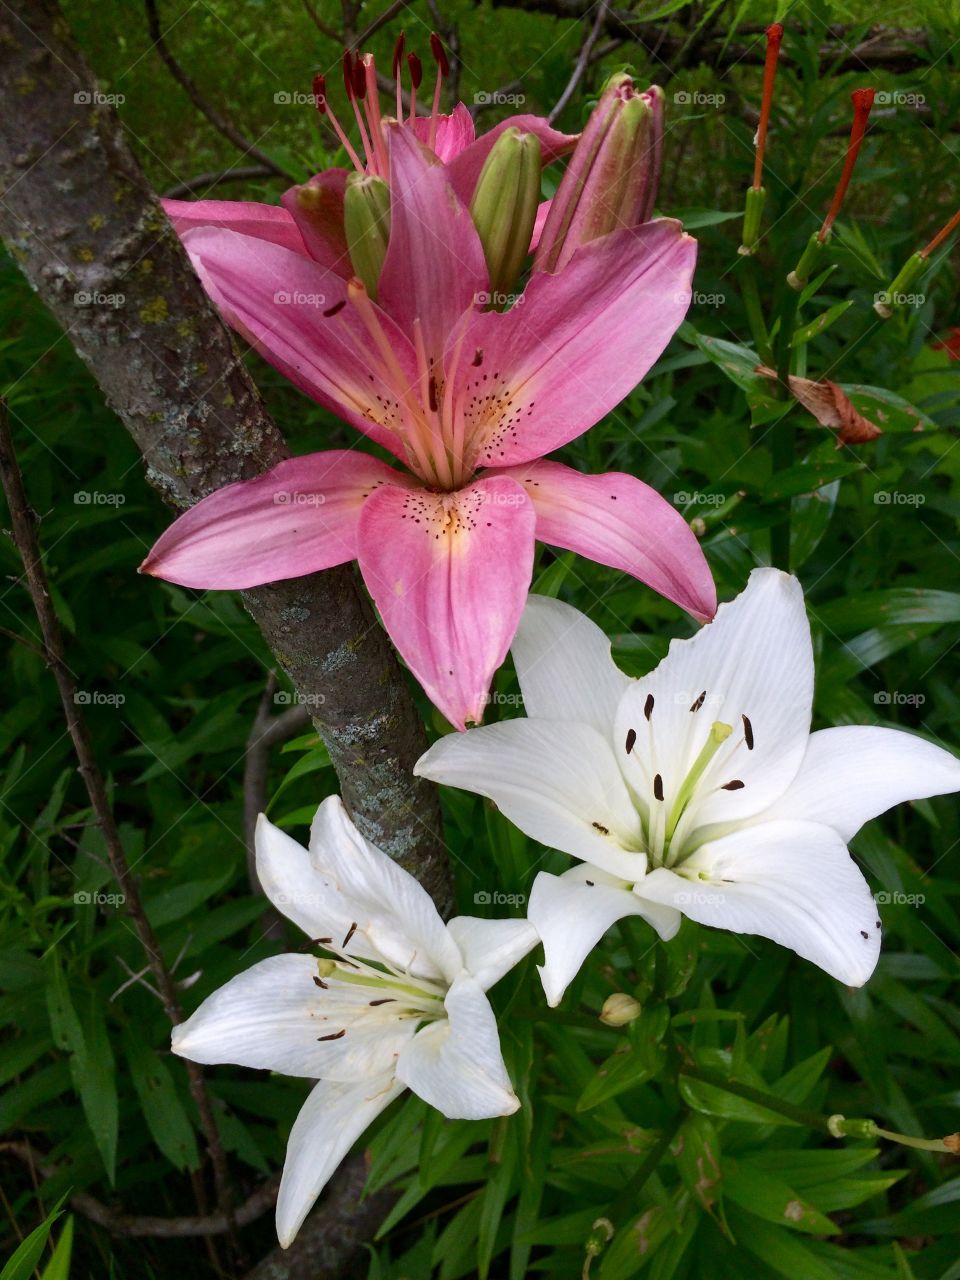 Lilies in bloom in Ohio 